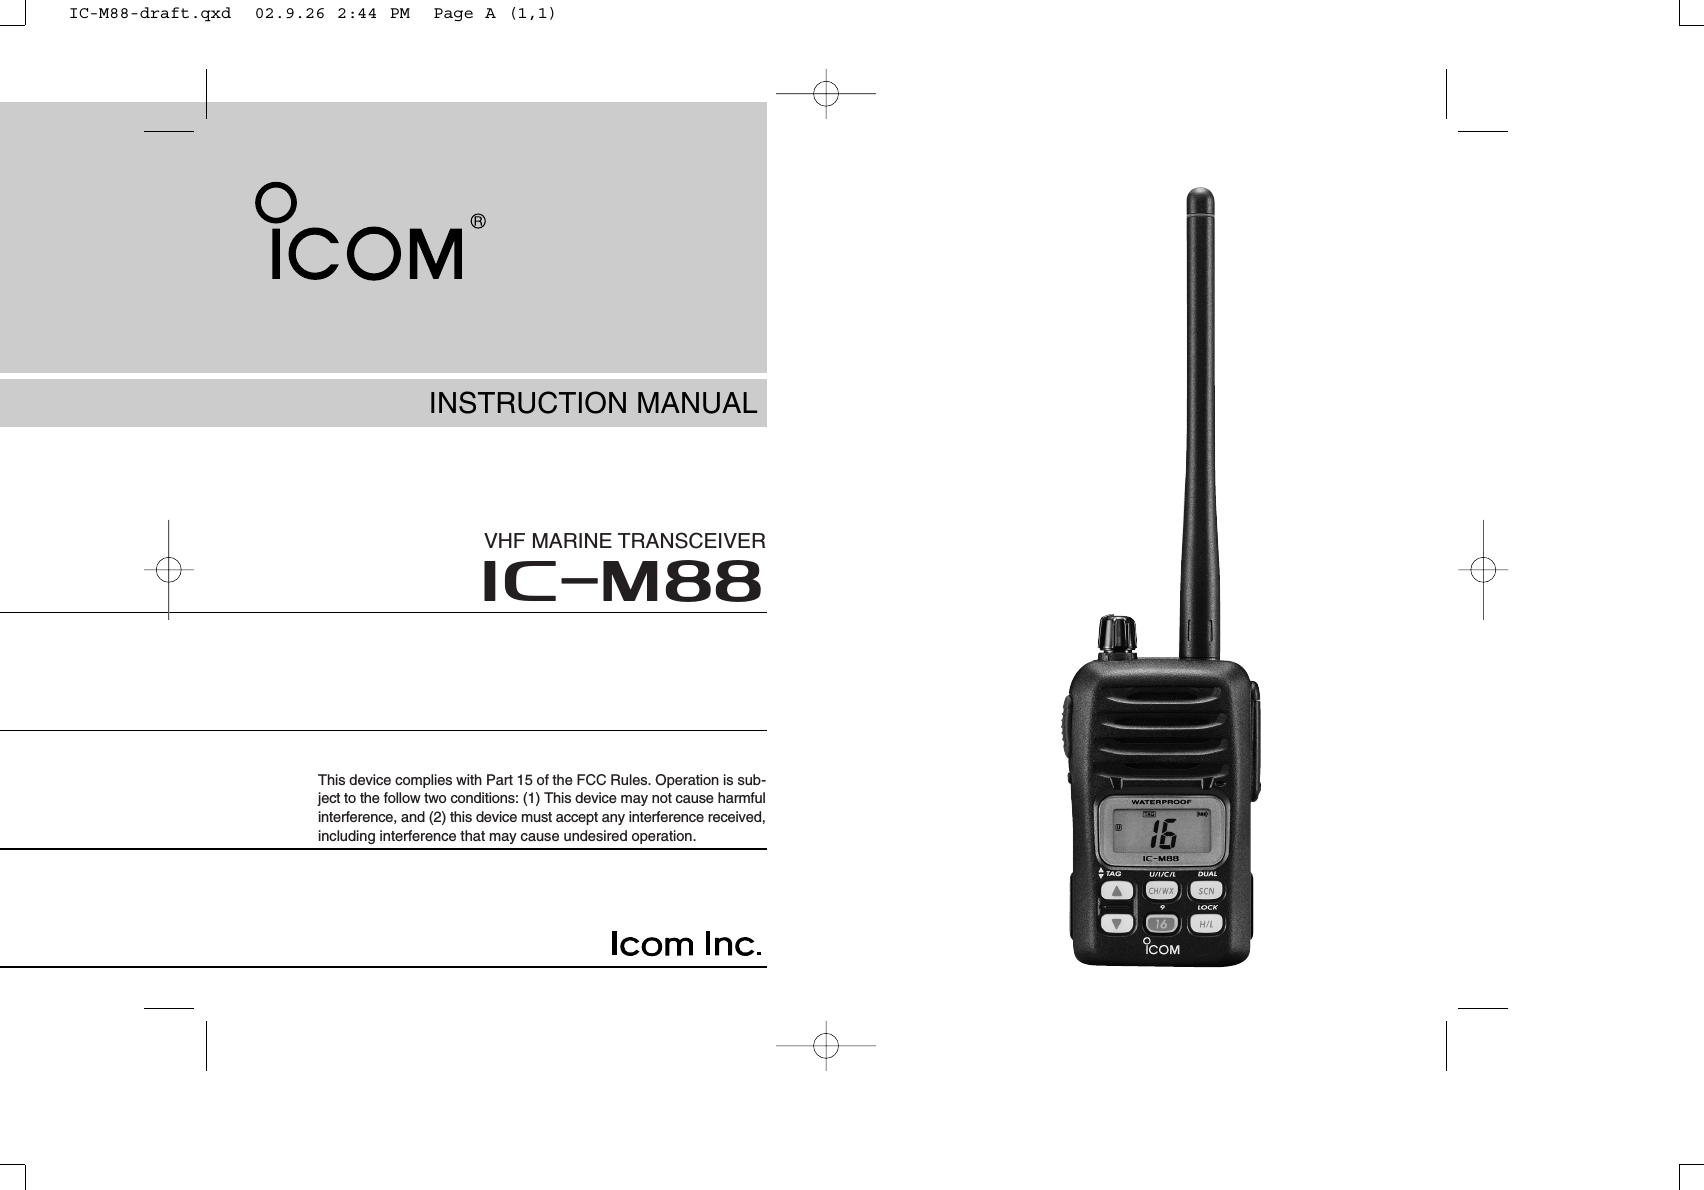 INSTRUCTION MANUALiM88VHF MARINE TRANSCEIVERThis device complies with Part 15 of the FCC Rules. Operation is sub-ject to the follow two conditions: (1) This device may not cause harmfulinterference, and (2) this device must accept any interference received,including interference that may cause undesired operation.IC-M88-draft.qxd  02.9.26 2:44 PM  Page A (1,1)